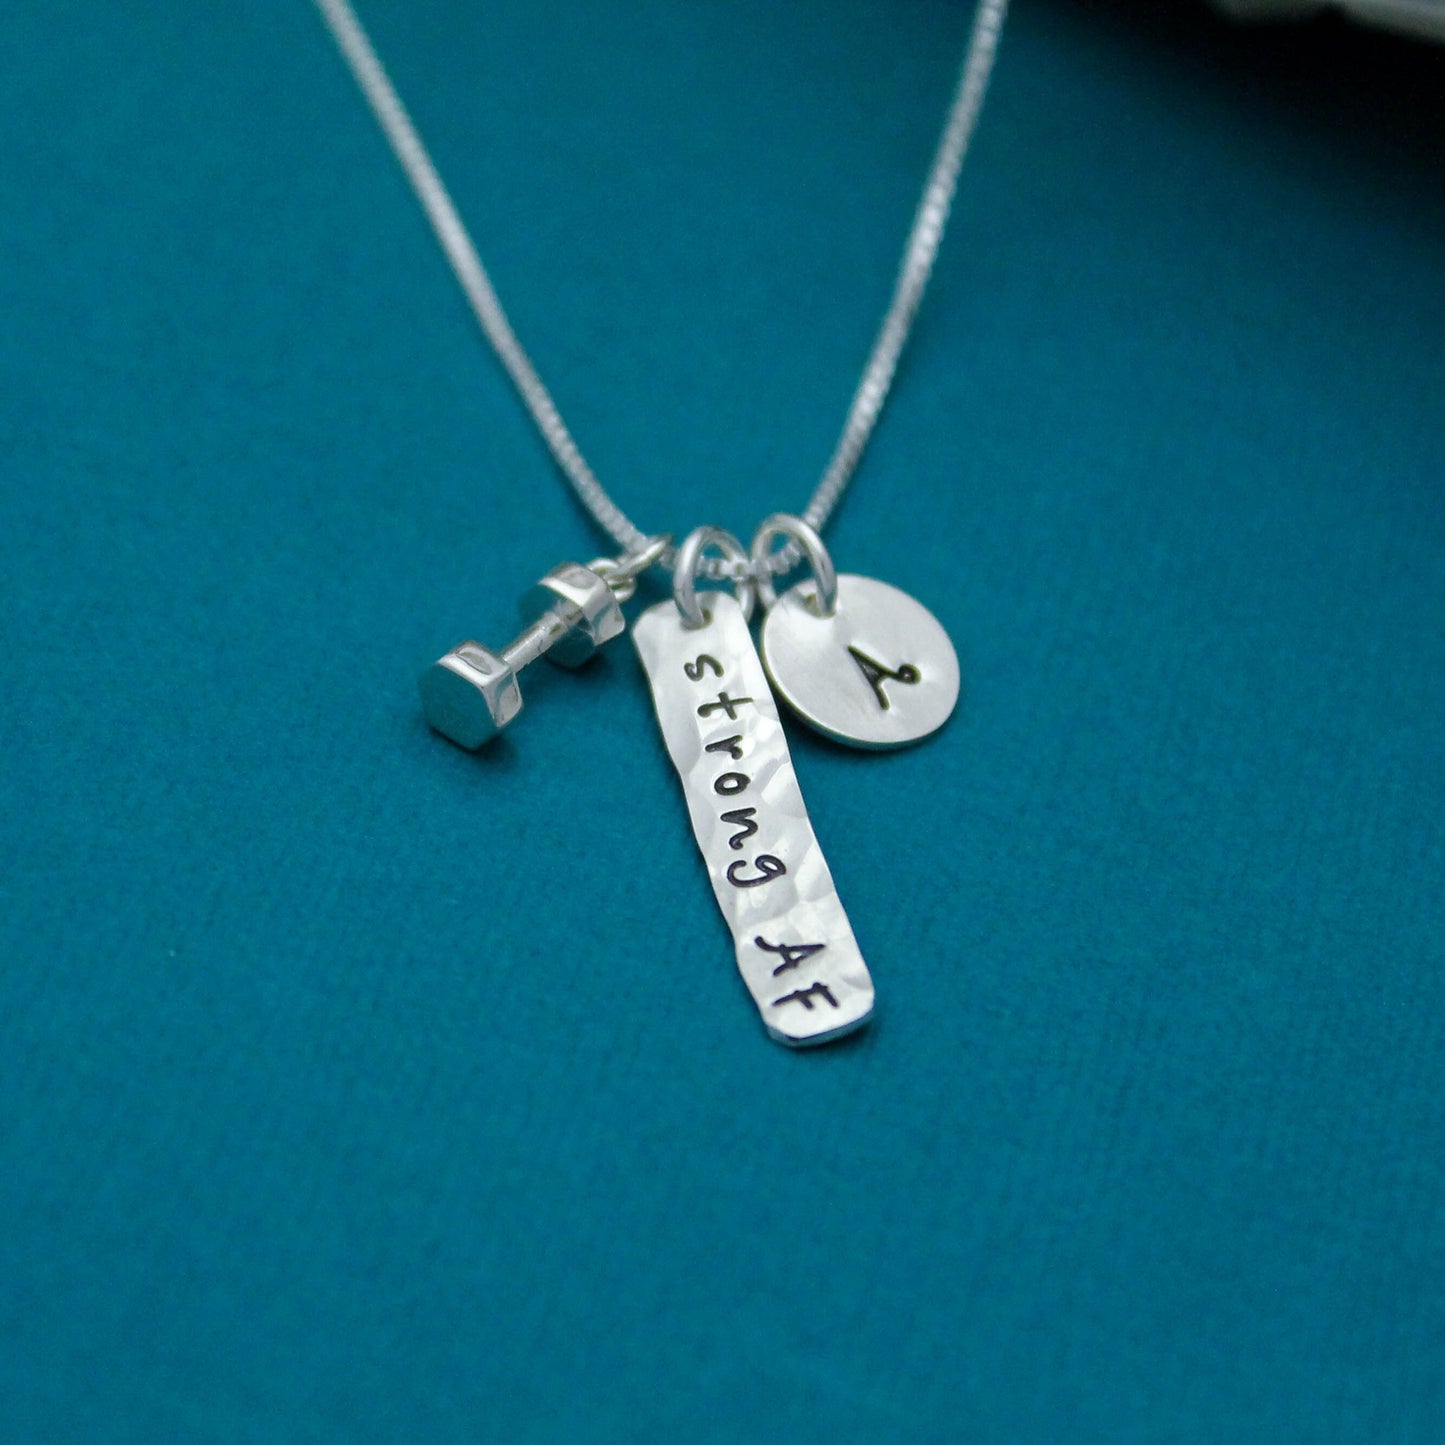 Strong AF Necklace in Sterling Silver with Initial, Motivational Inspirational Jewelry, Strong As Fuck Jewelry, Curse Word Jewelry Gift